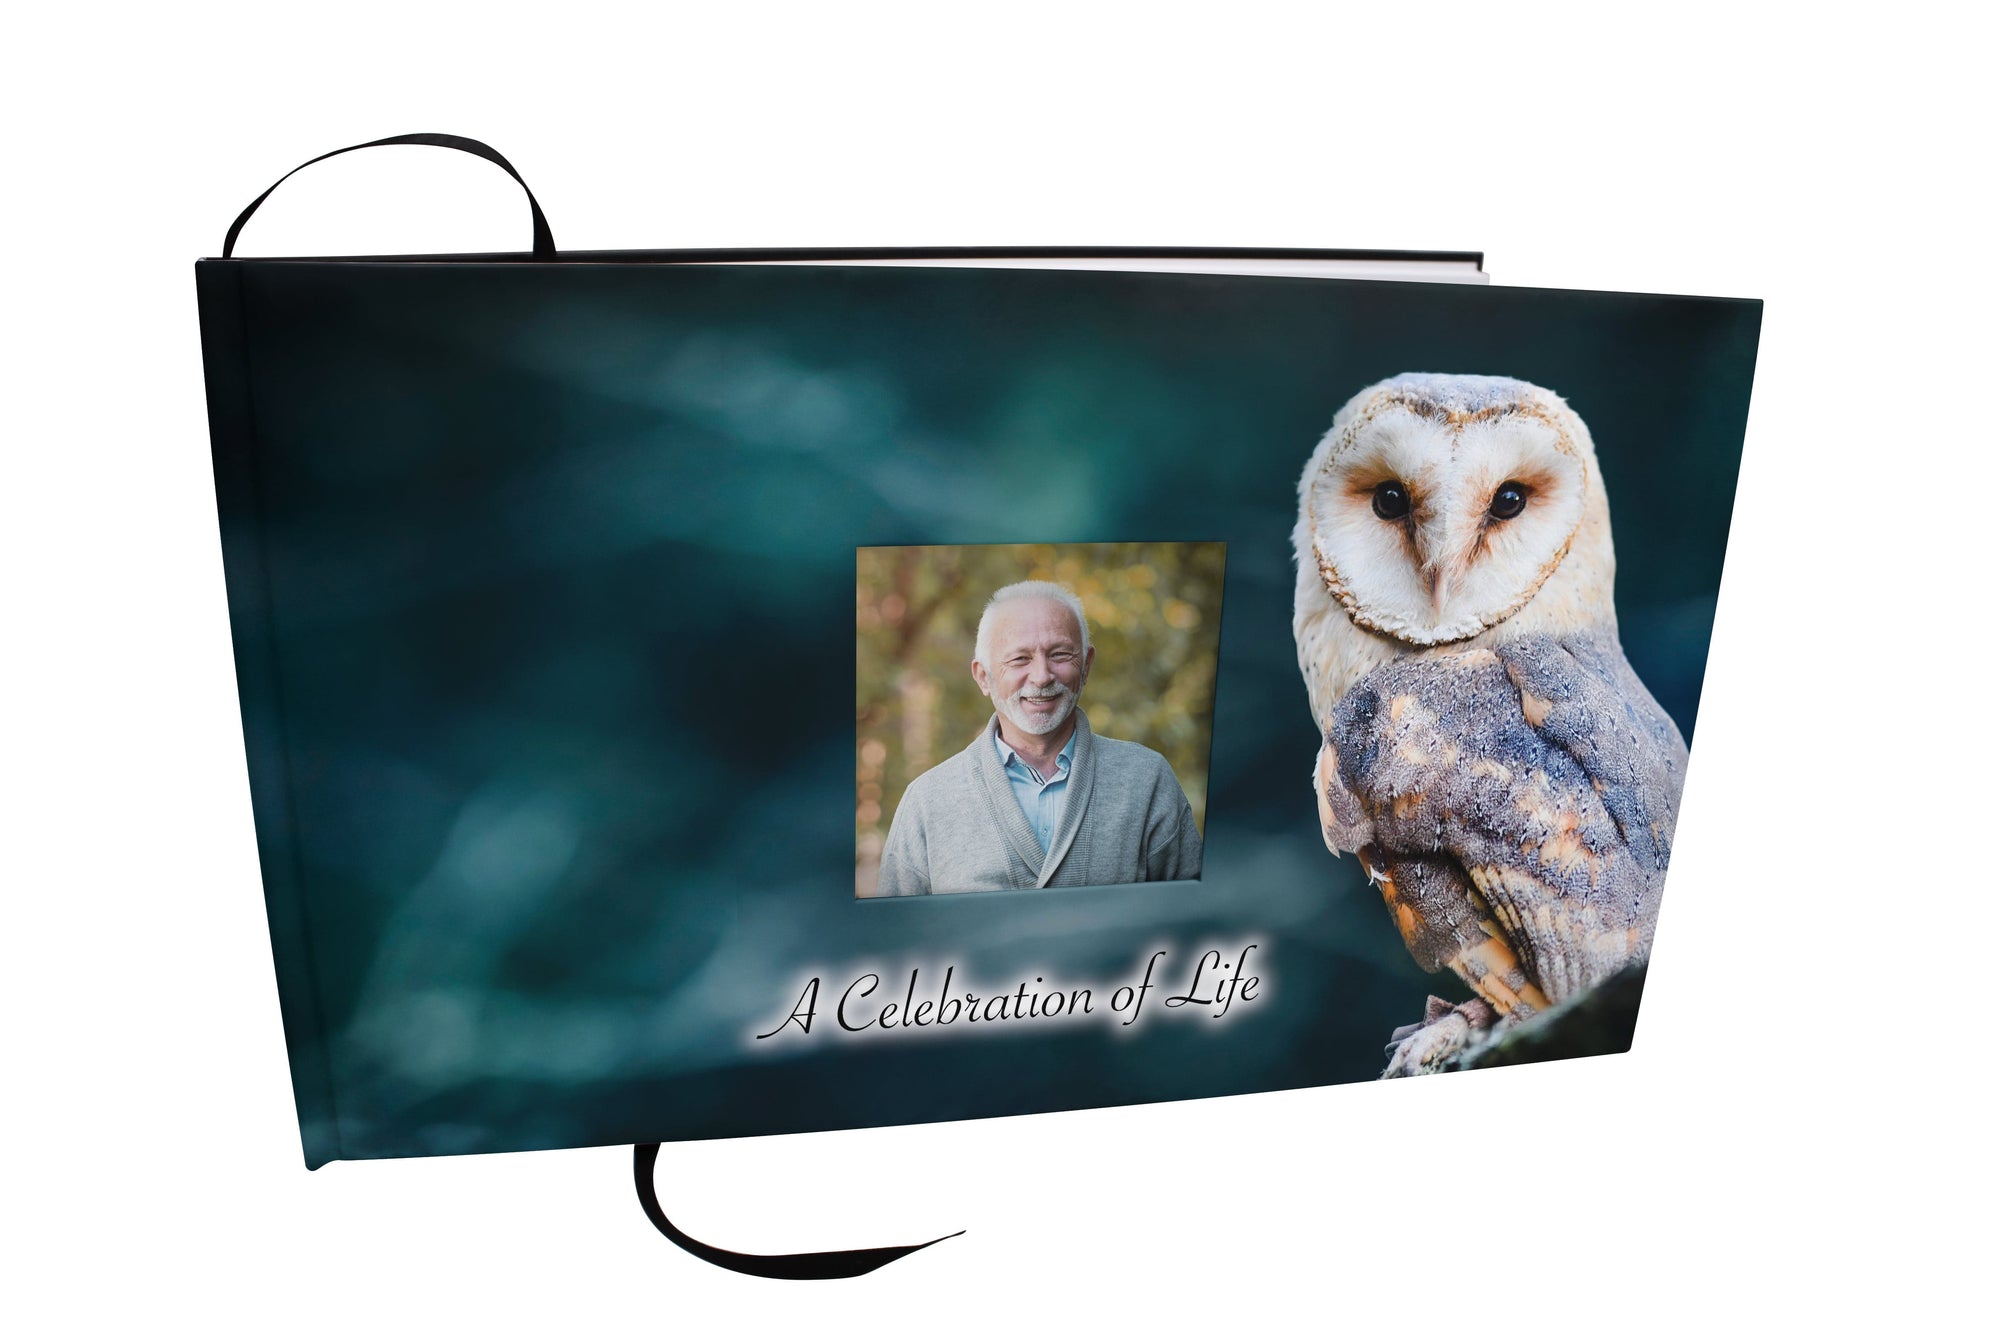 Commemorative Cremation Urns Owl Matching Themed 'Celebration of Life' Guest Book for Funeral or Memorial Service